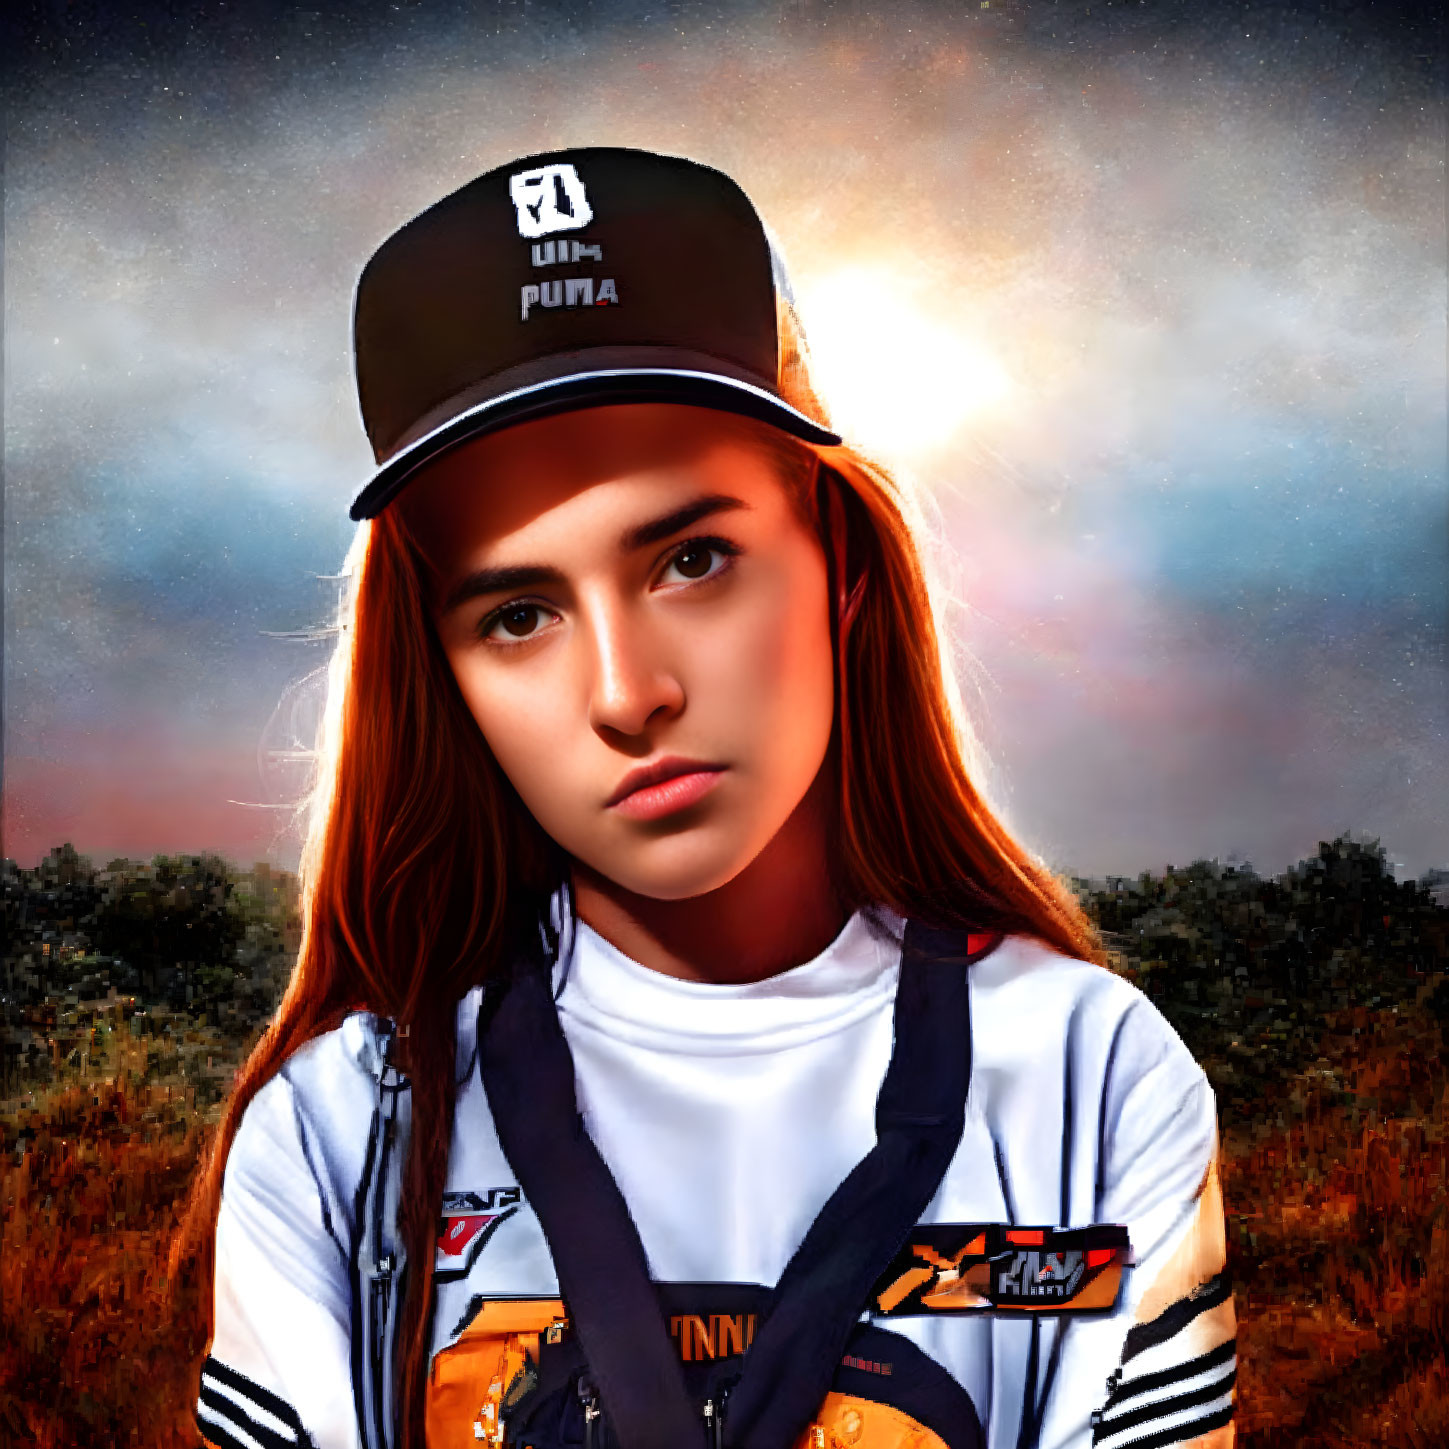 Digital portrait of person with sunset background, cap, white t-shirt with orange accents.